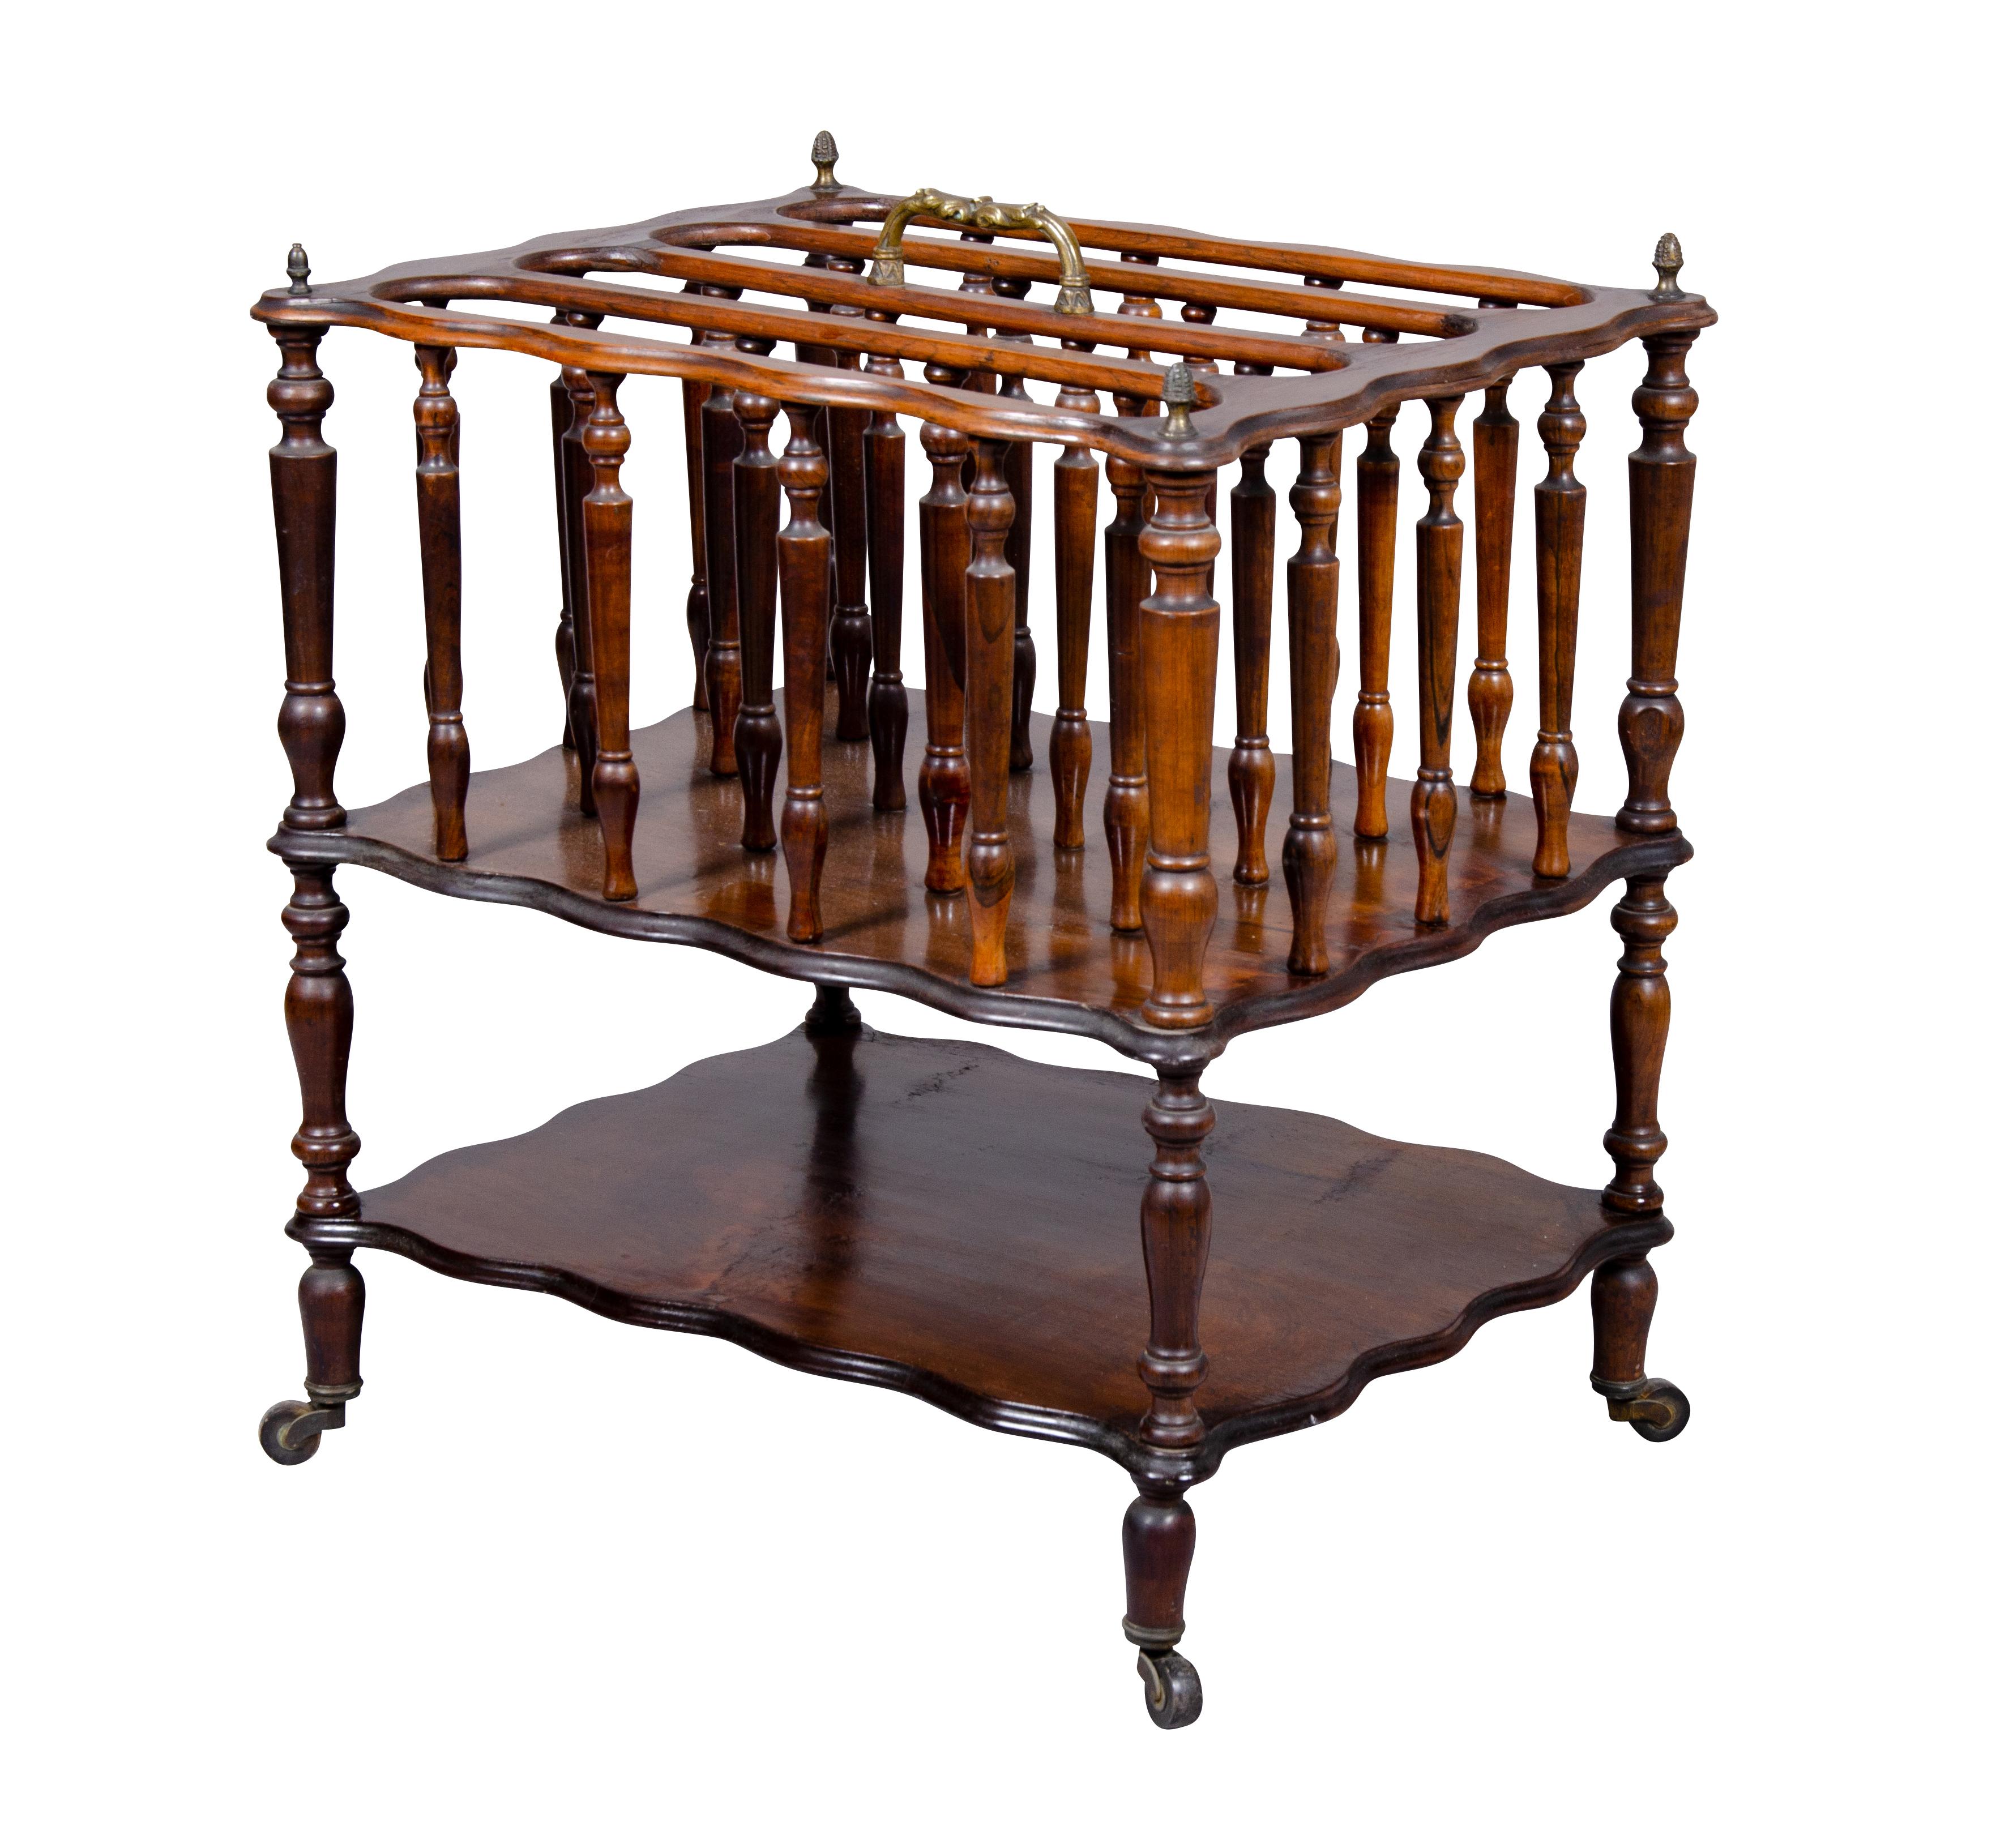 Constructed from solid rosewood. With brass carry handle over dividers with spindles , lower shelf, turned legs and casters. This form was designed by Hepplewhite for the Archbishop of Canterbury form holding sheet music and folios. Today its useful